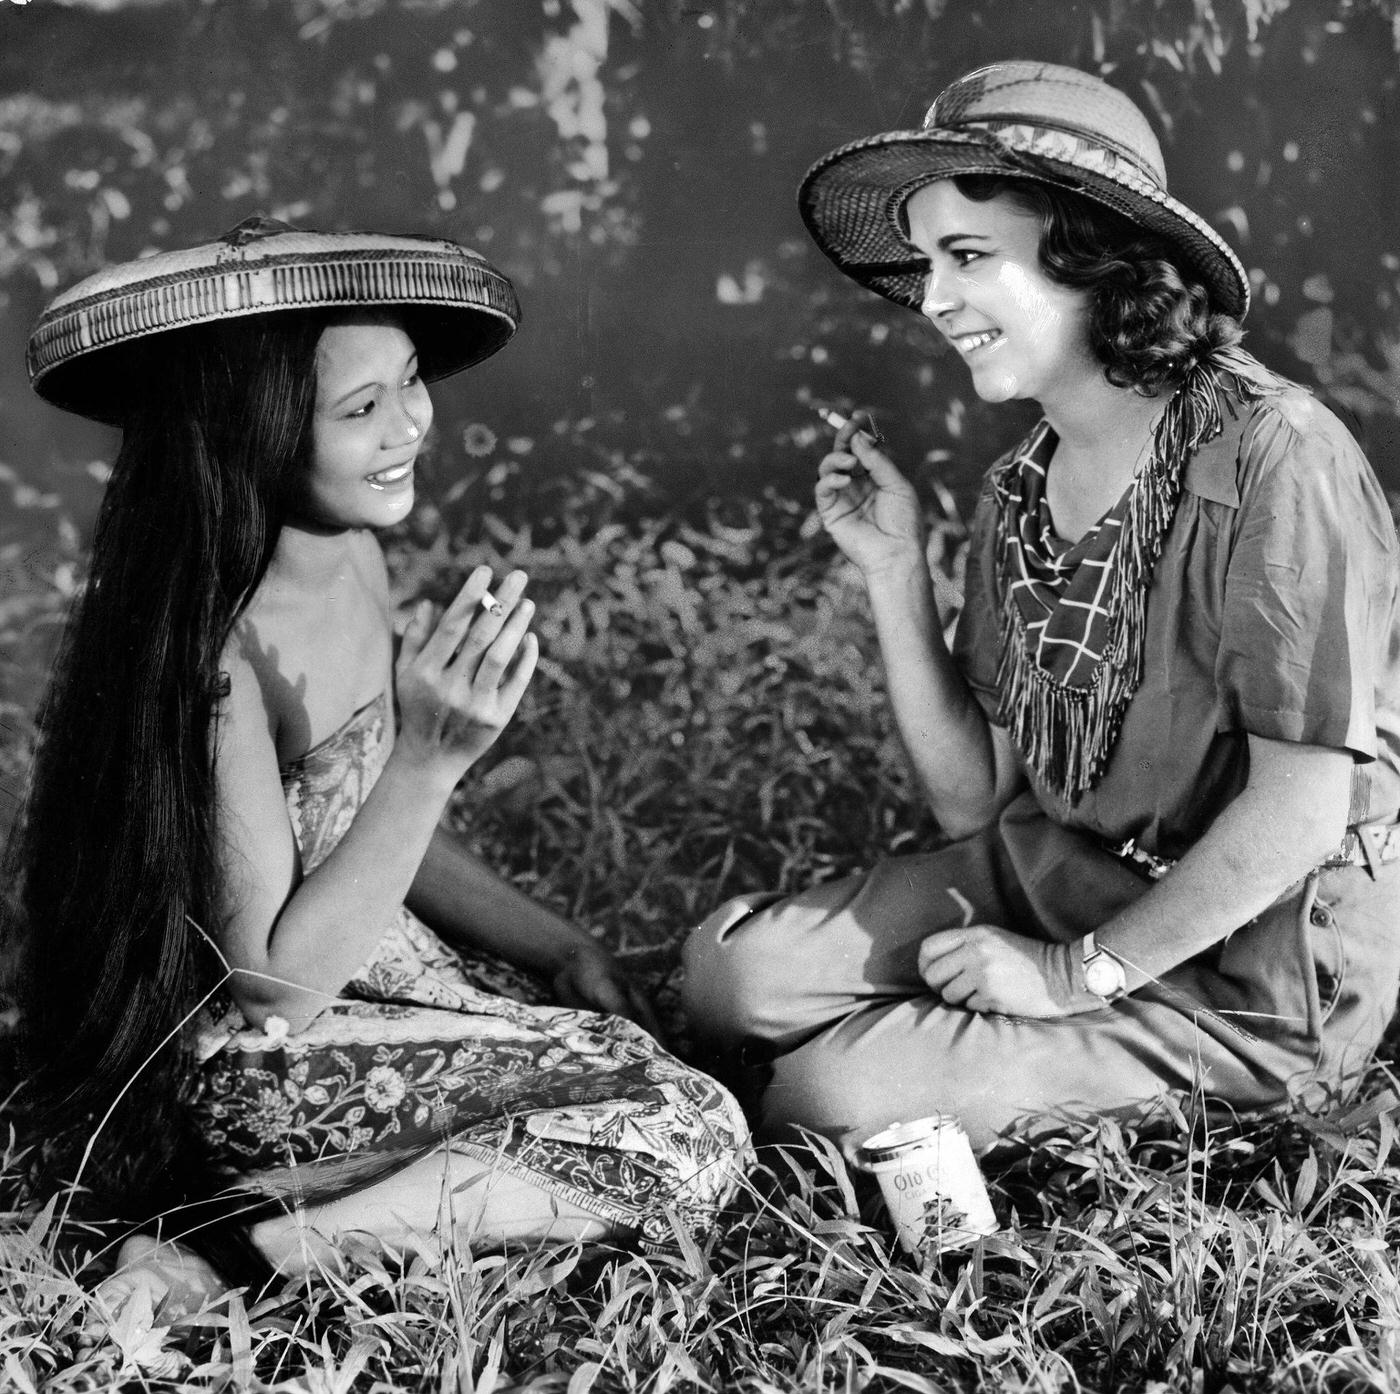 Osa Johnson smoking a cigarette with a woman in traditional clothing, 1937